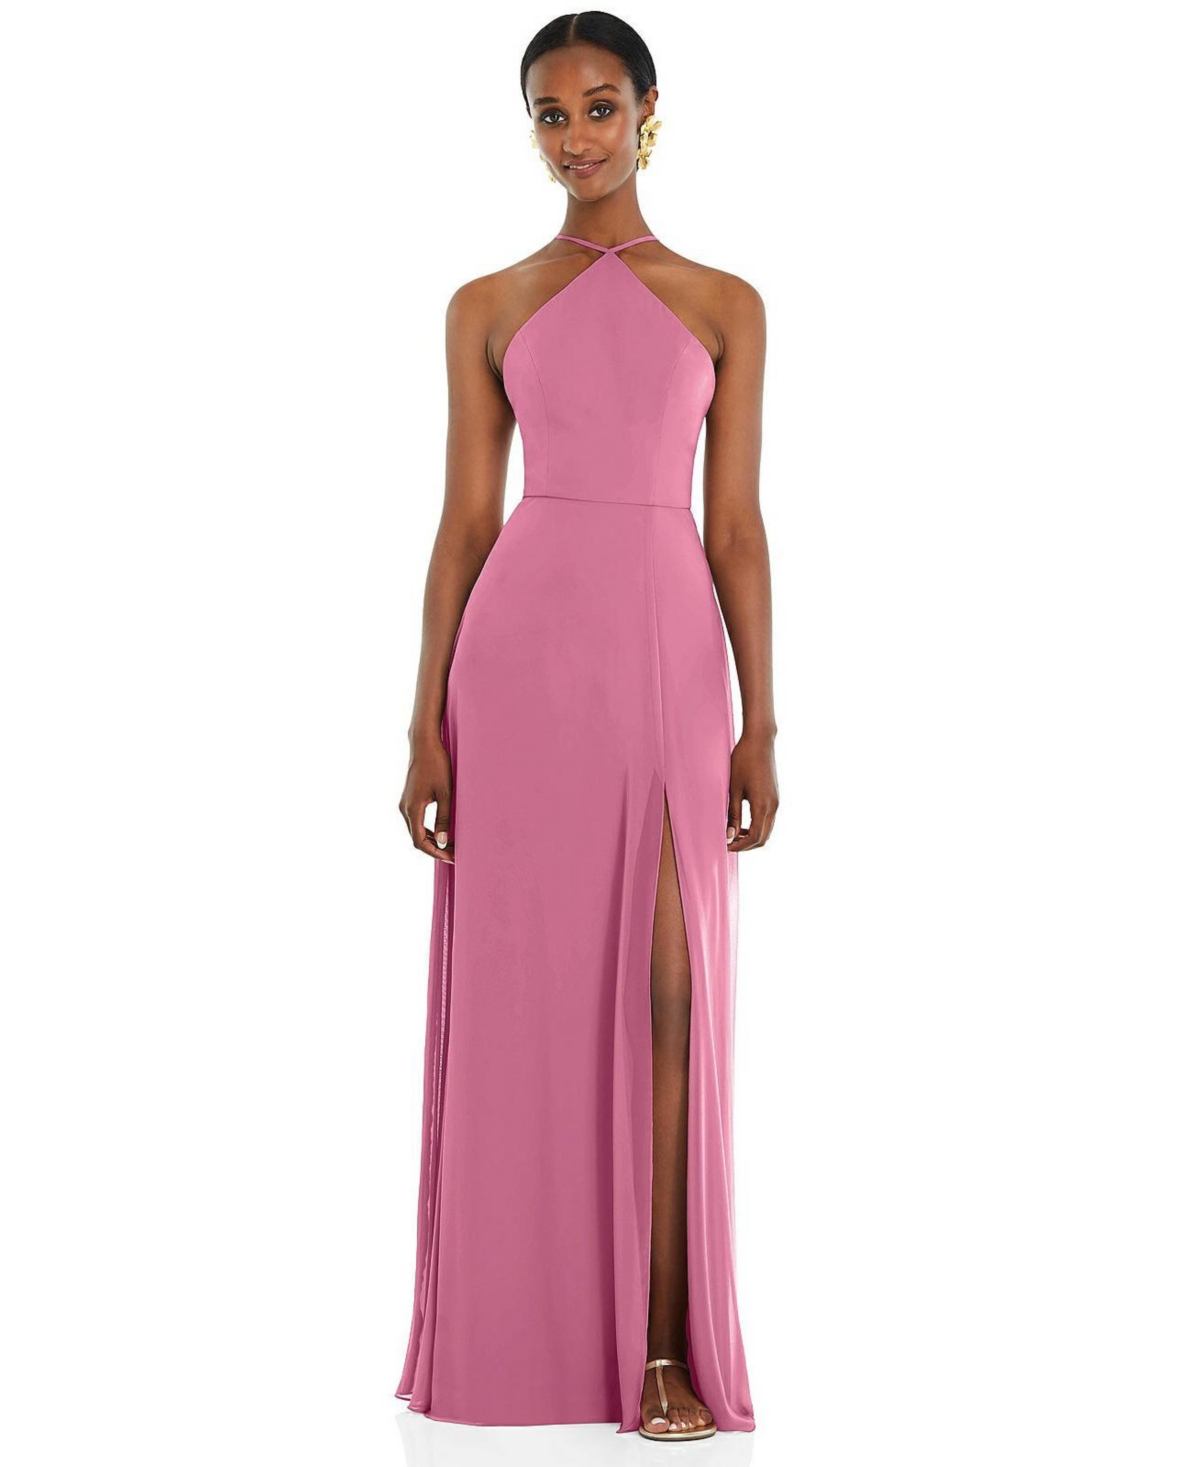 LOVELY WOMENS DIAMOND HALTER MAXI DRESS WITH ADJUSTABLE STRAPS